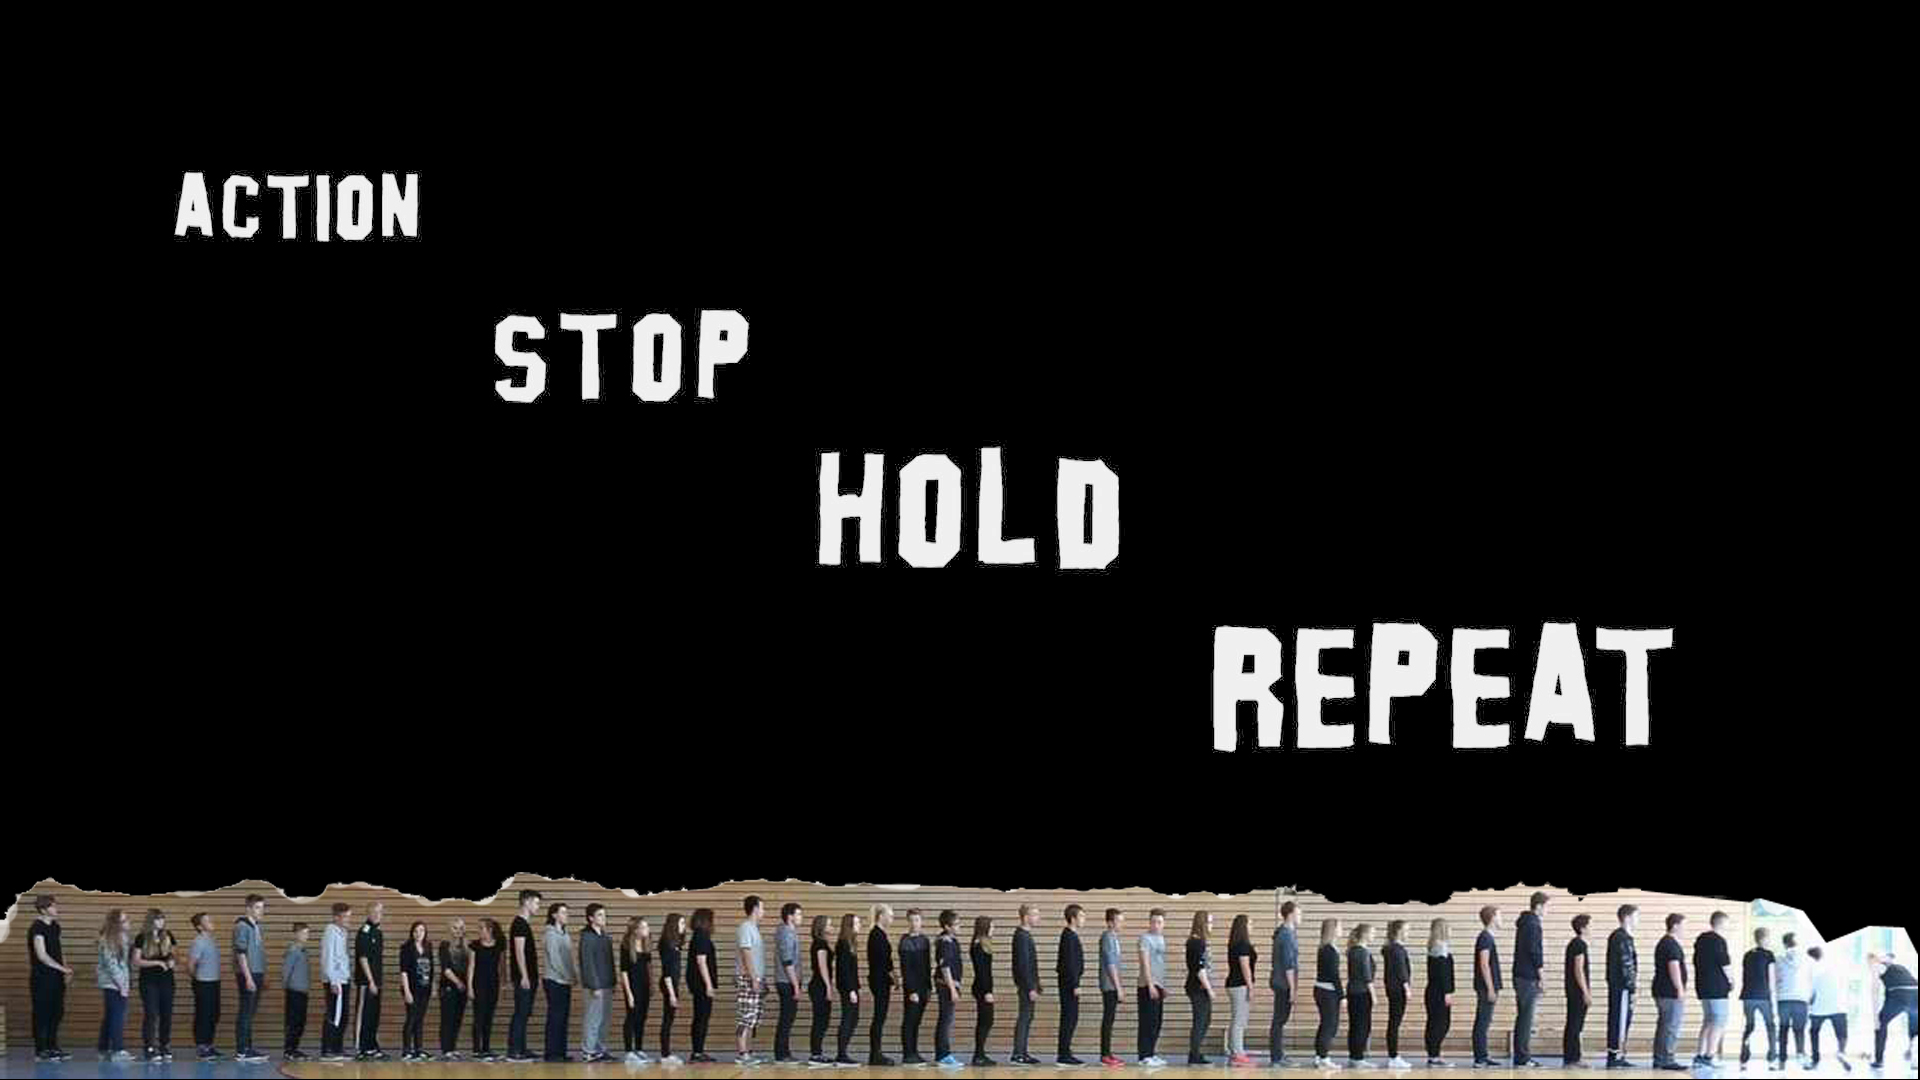 ACTION-STOP-HOLD-REPEAT